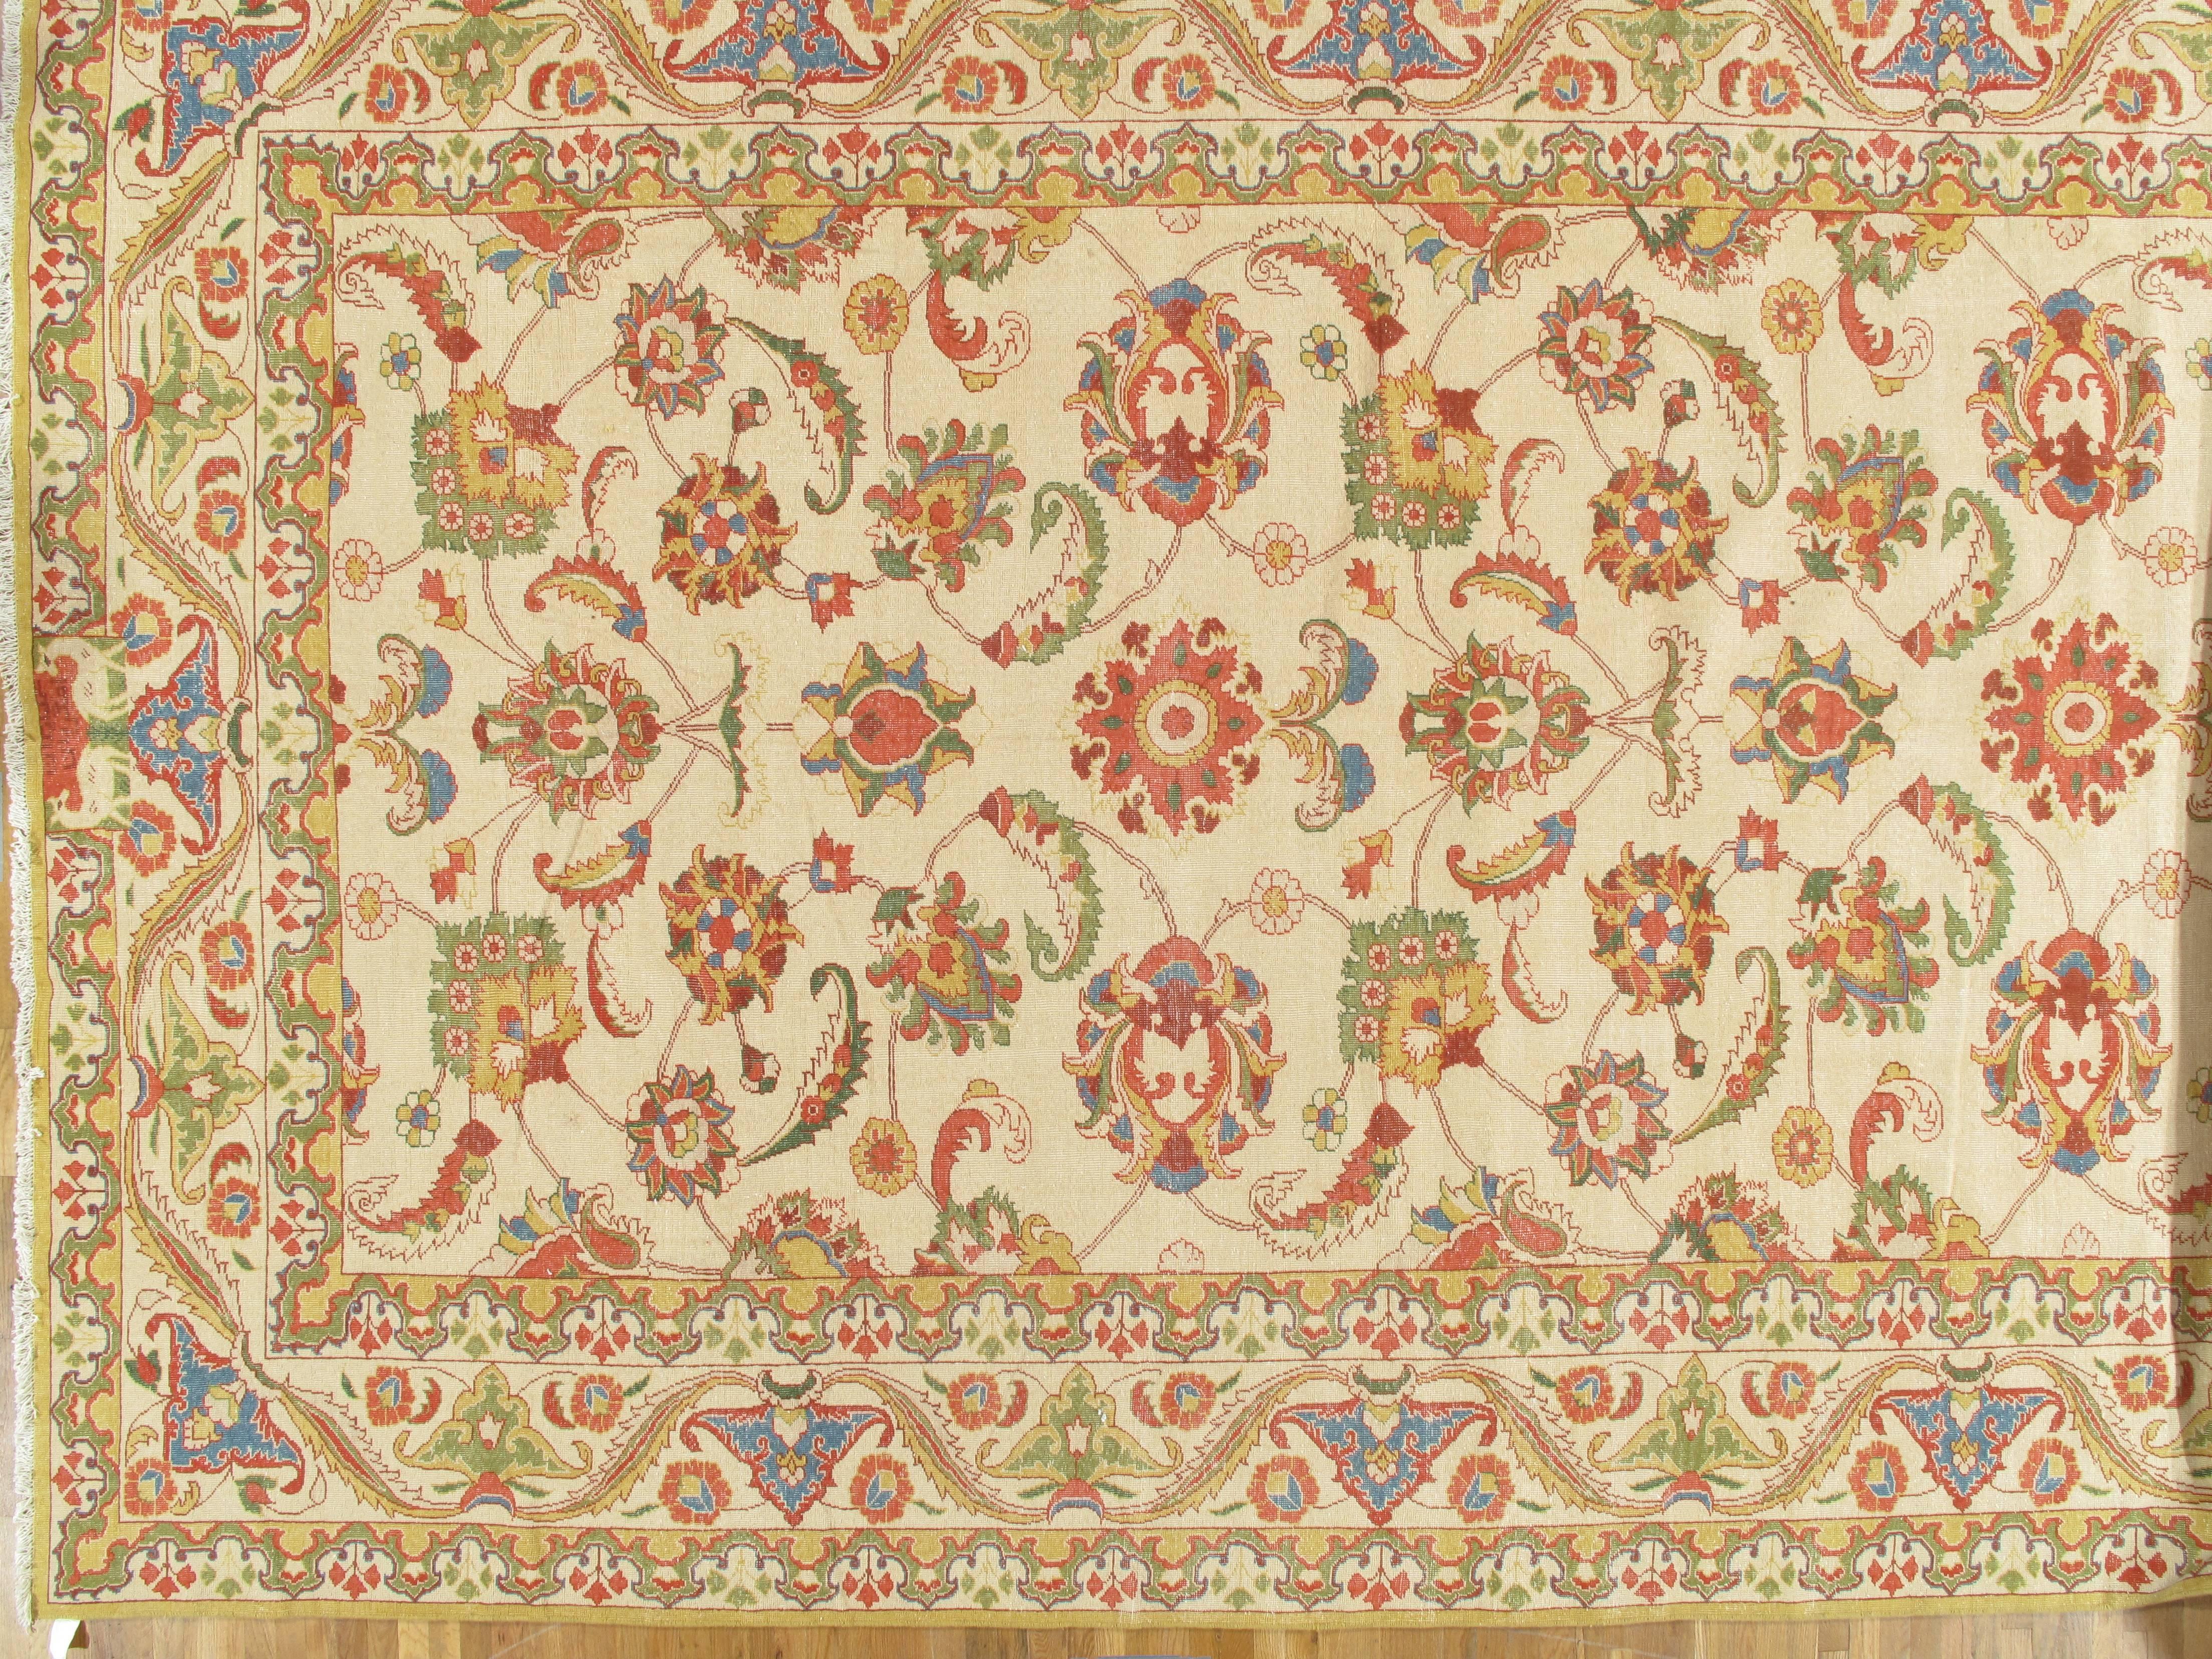 Hand-Knotted Vintage Persian Sultanabad Carpet Handmade Oriental Rug, Ivory, Green, Blue, Red